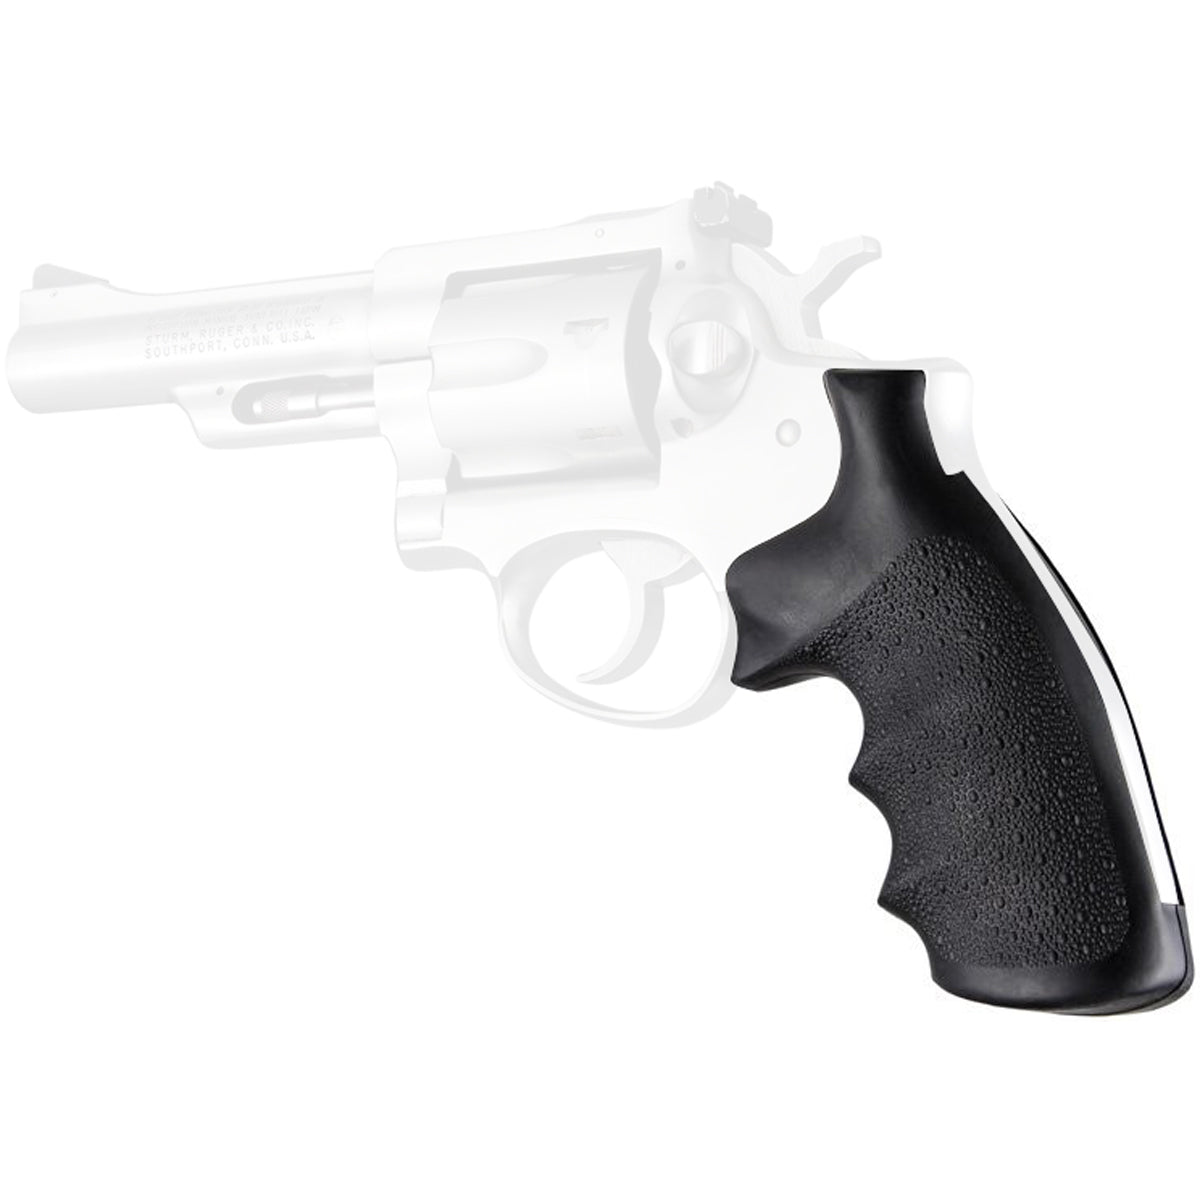 Hogue Ruger Security Six Rubber Monogrip - Black Hogue